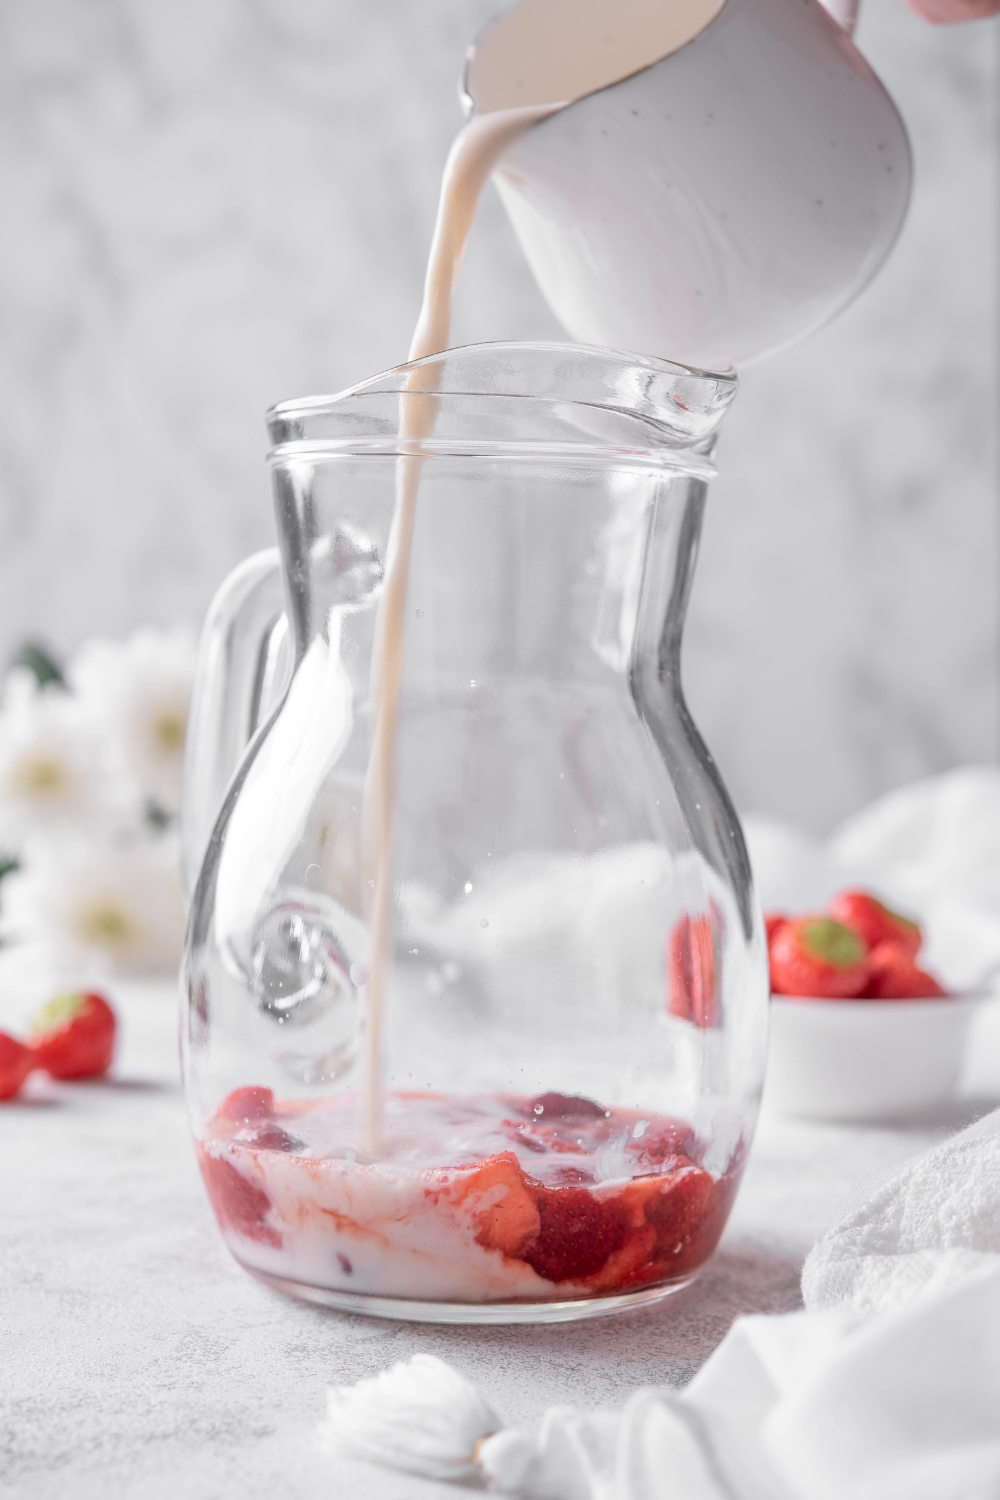 A pitcher with muddled strawberries and a smaller cup with coconut milk being poured into it.